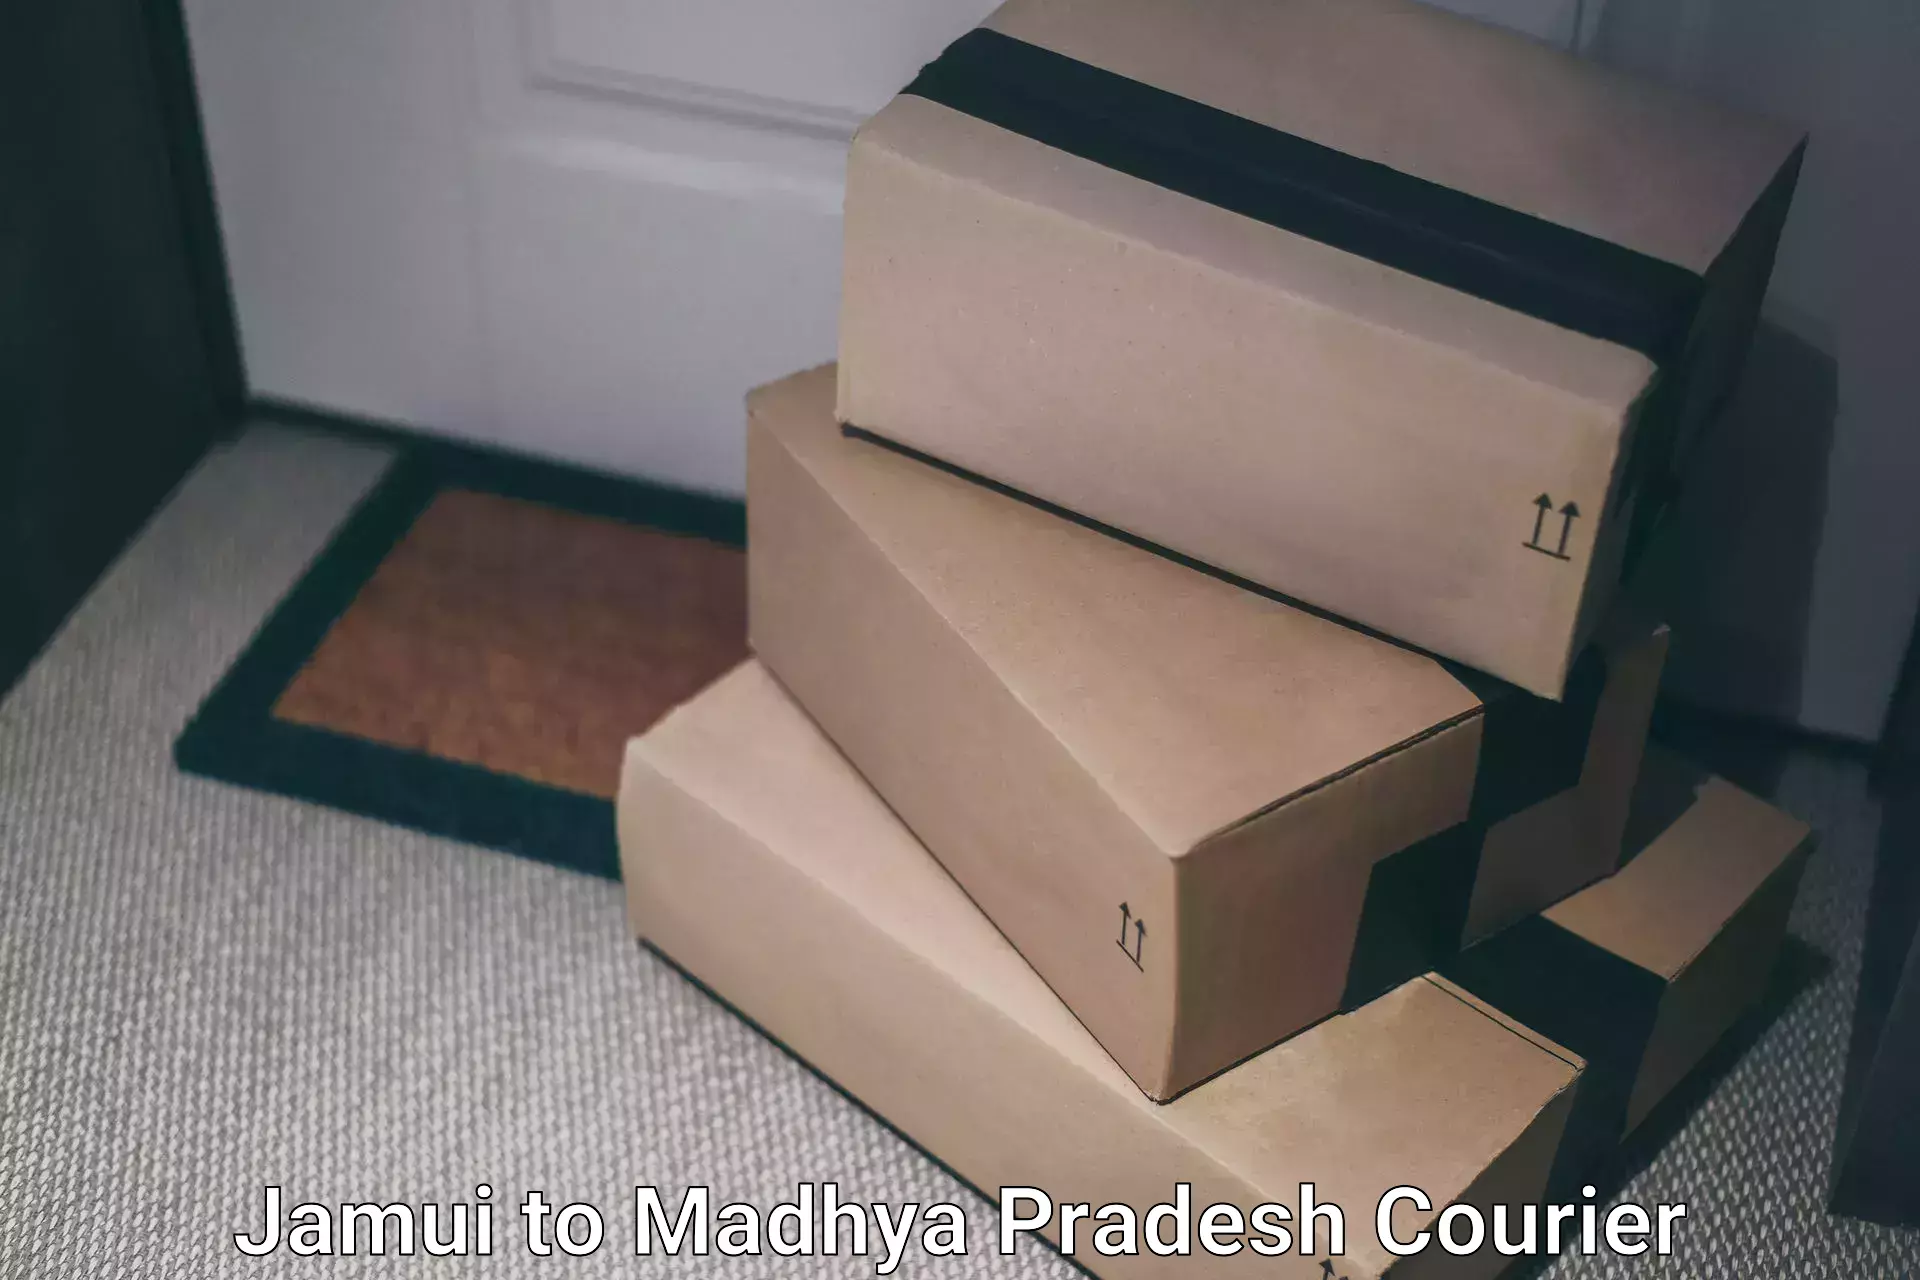 Parcel service for businesses Jamui to Madhya Pradesh